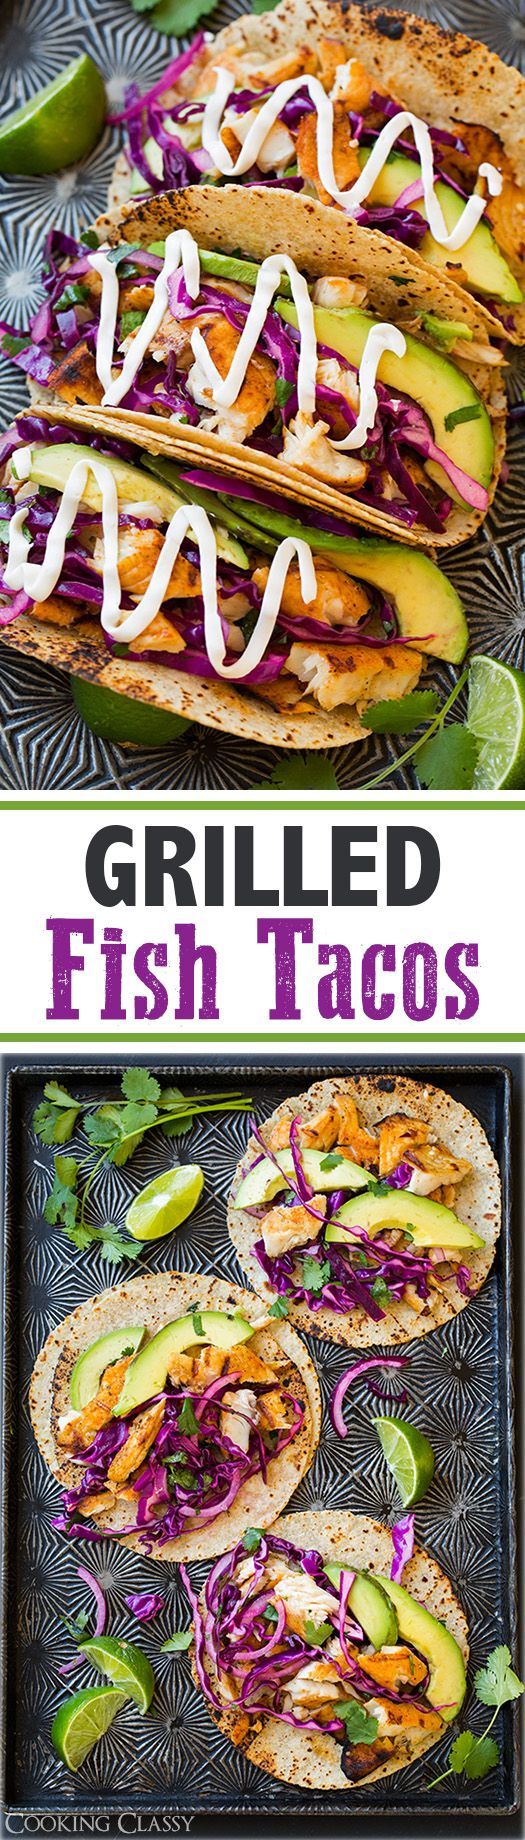 Grilled Fish Tacos with Lime Cabbage Slaw – These tacos are awesome! Delicious flavor and easy to make!